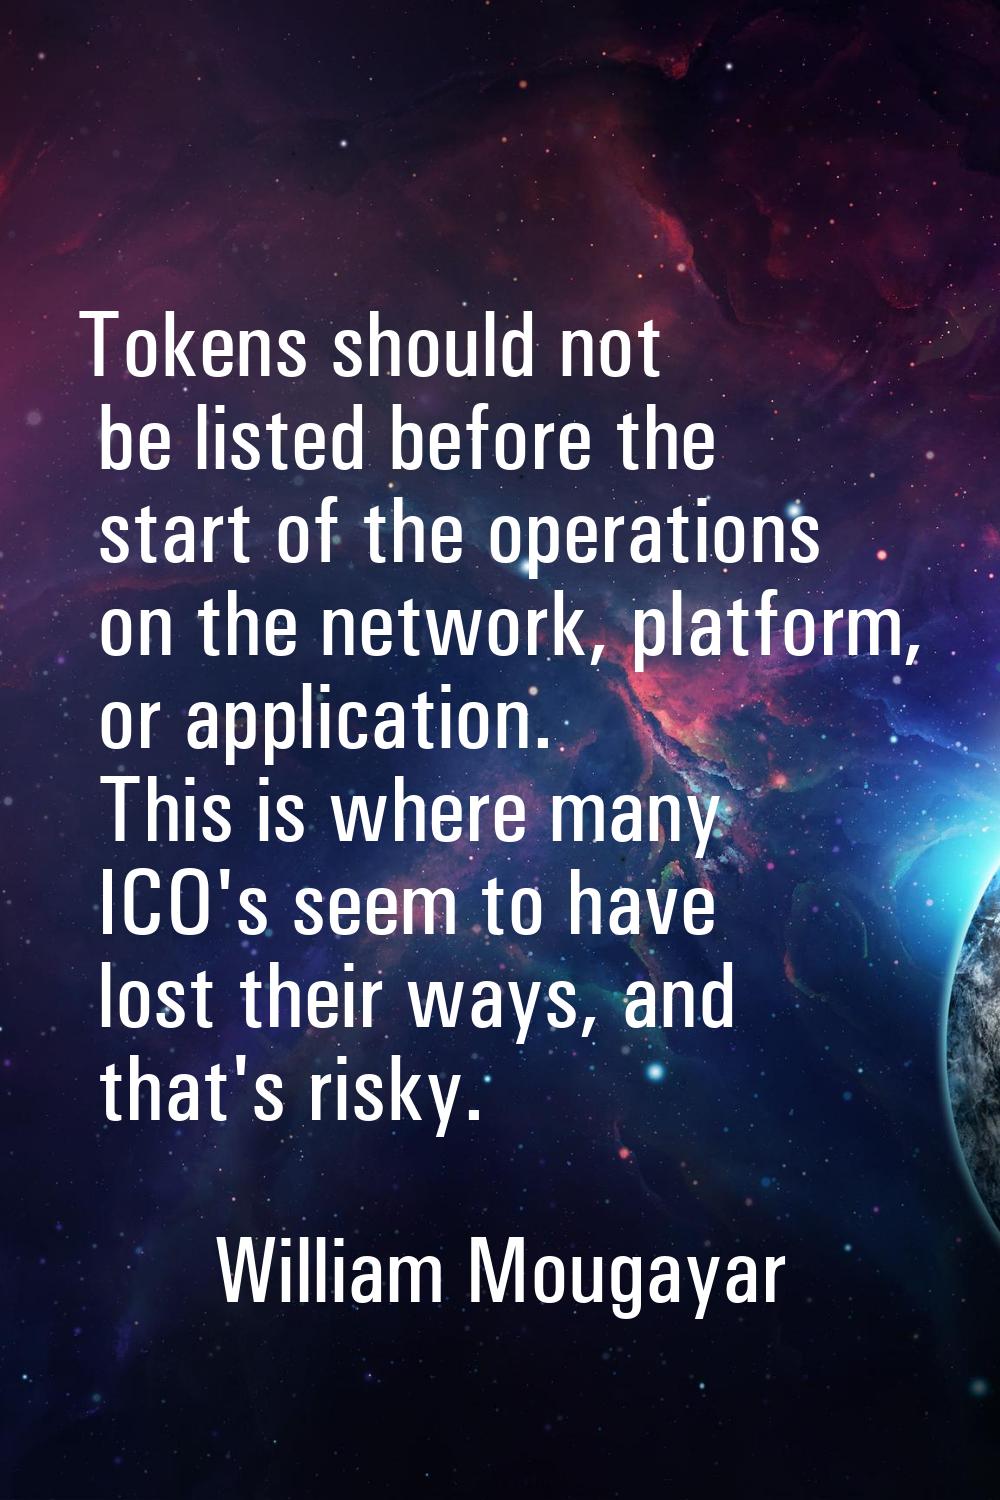 Tokens should not be listed before the start of the operations on the network, platform, or applica